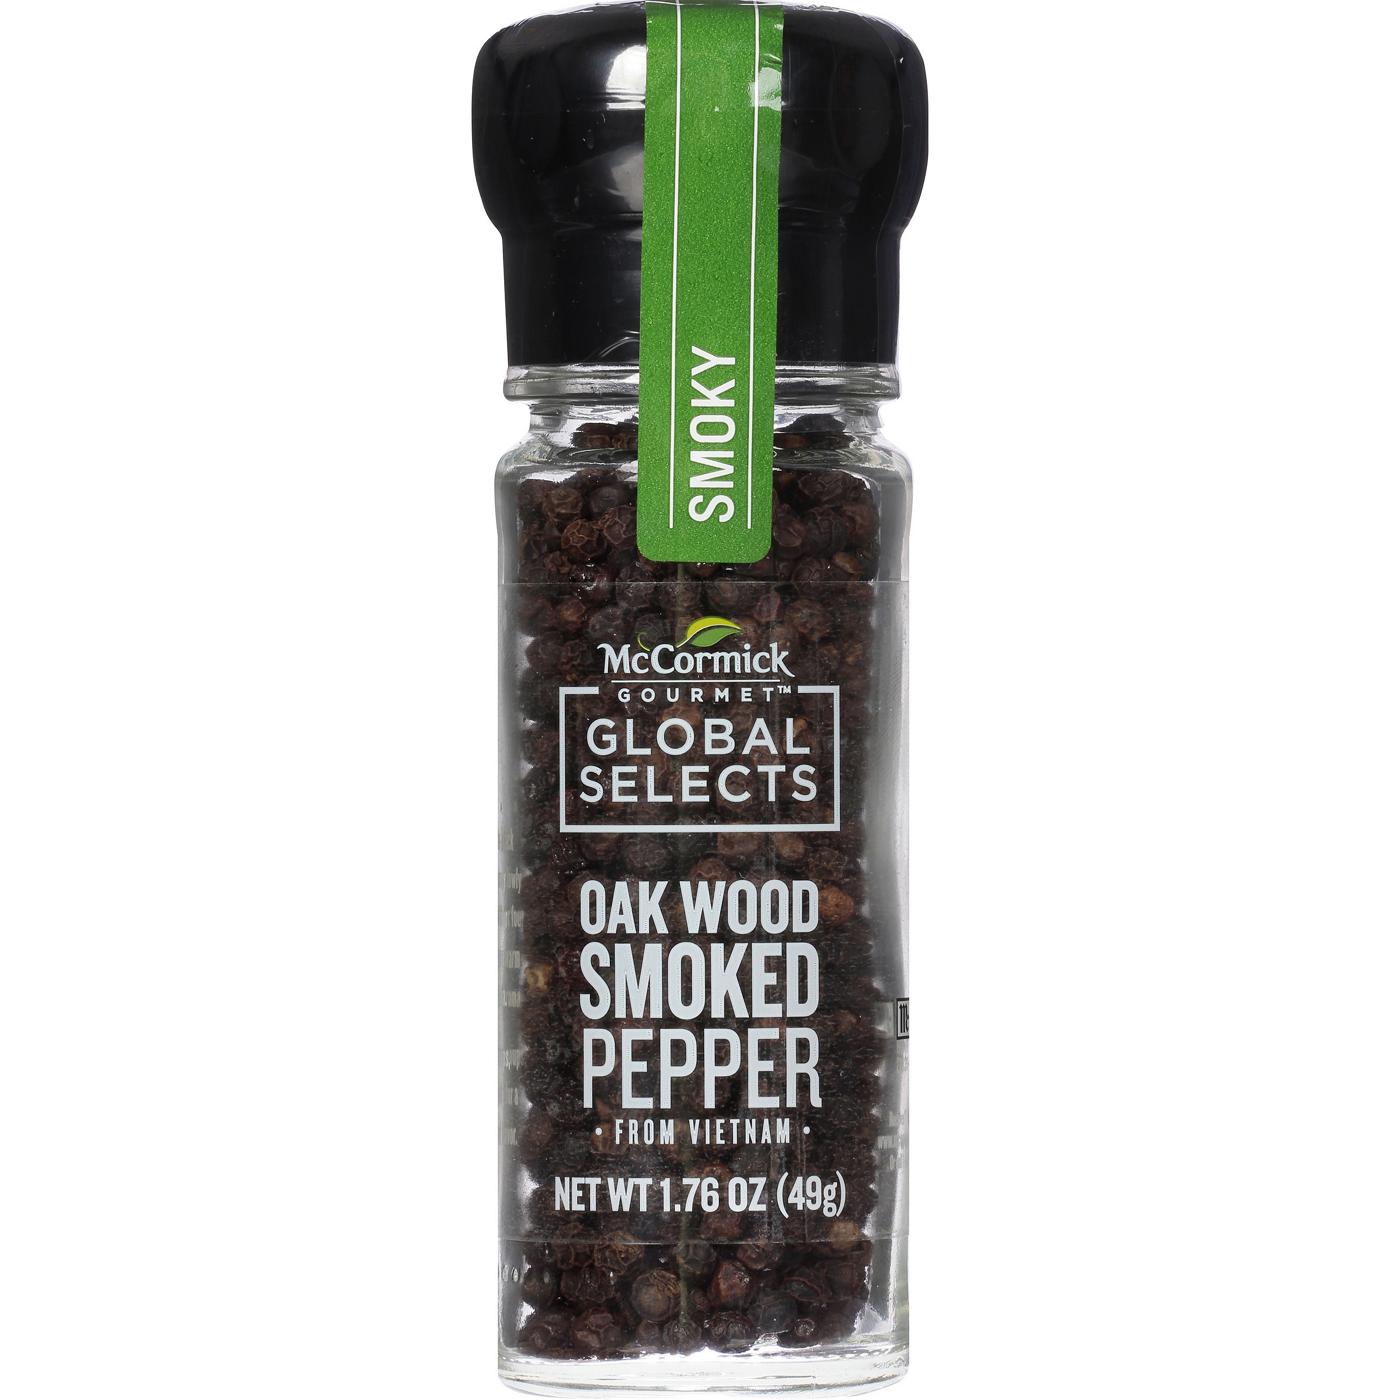 McCormick Gourmet Global Selects Oak Wood Smoked Pepper from Vietnam; image 1 of 7